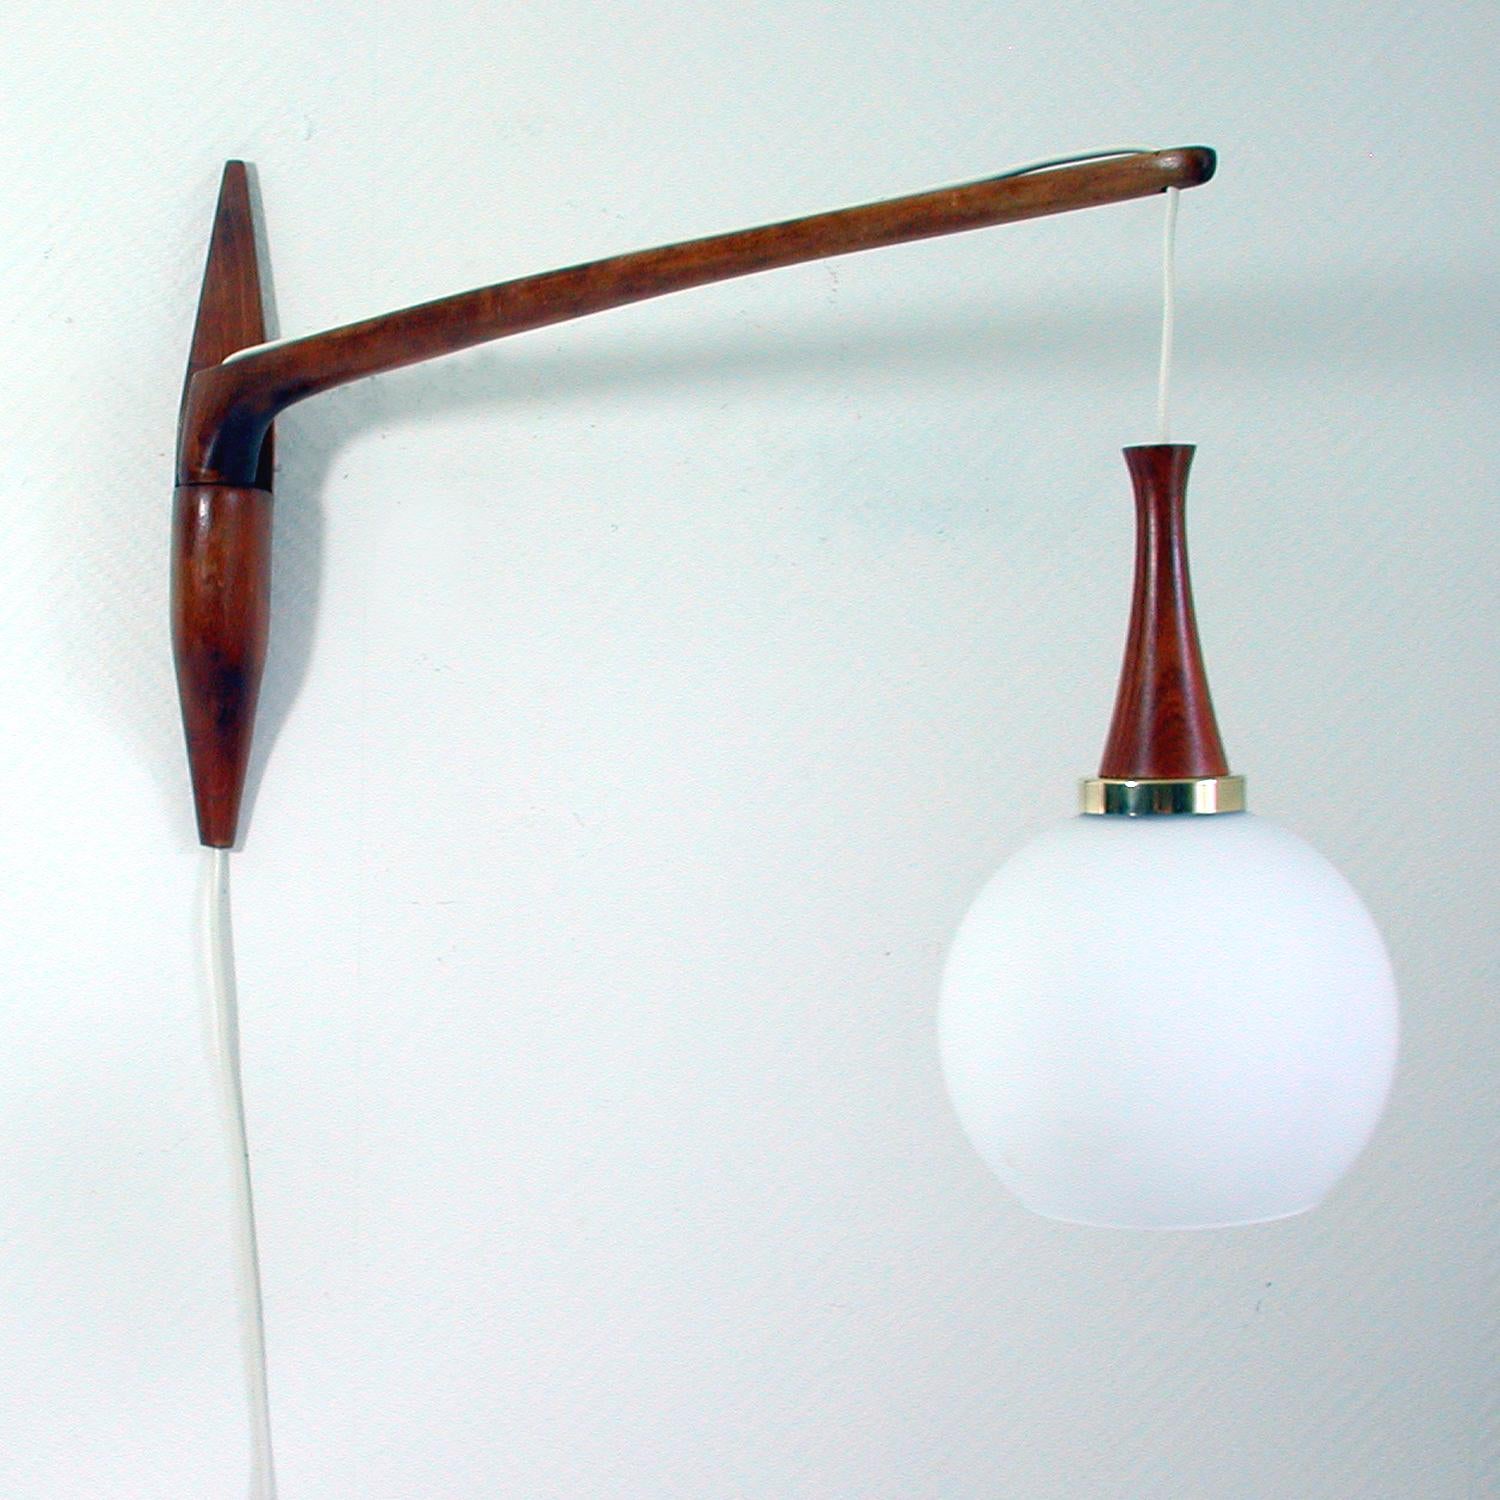 This elegant large midcentury wall light was designed and manufactured in Sweden in the 1960s in the Manner of Uno & Osten Kristiansson for Luxus. It has got a teak arm that swings left and right with a hanging milk glass shade. Diameter of